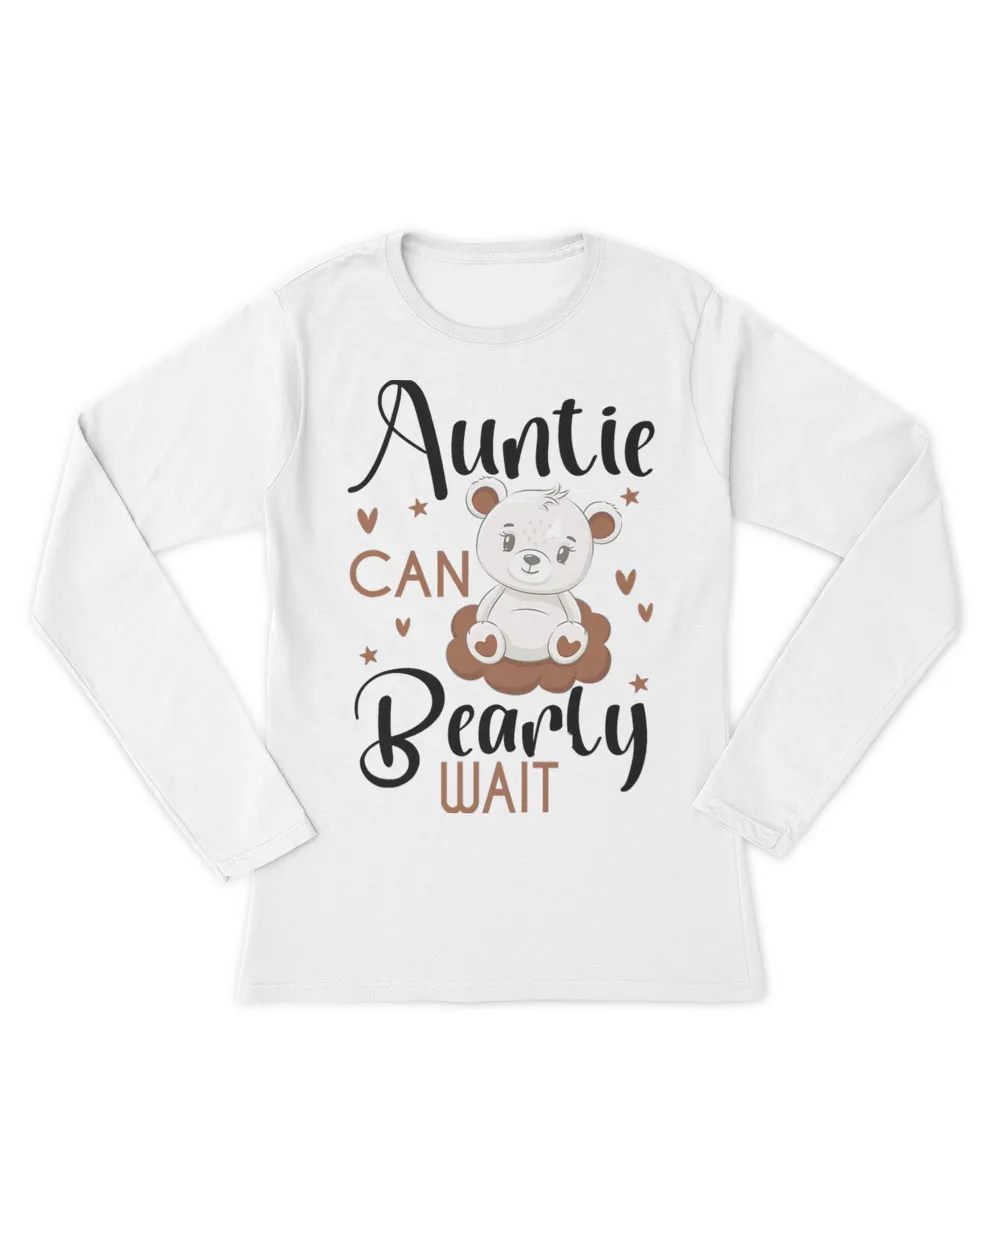 Auntie Can Bearly Wait Baby Shower Bear Design Pregnancy